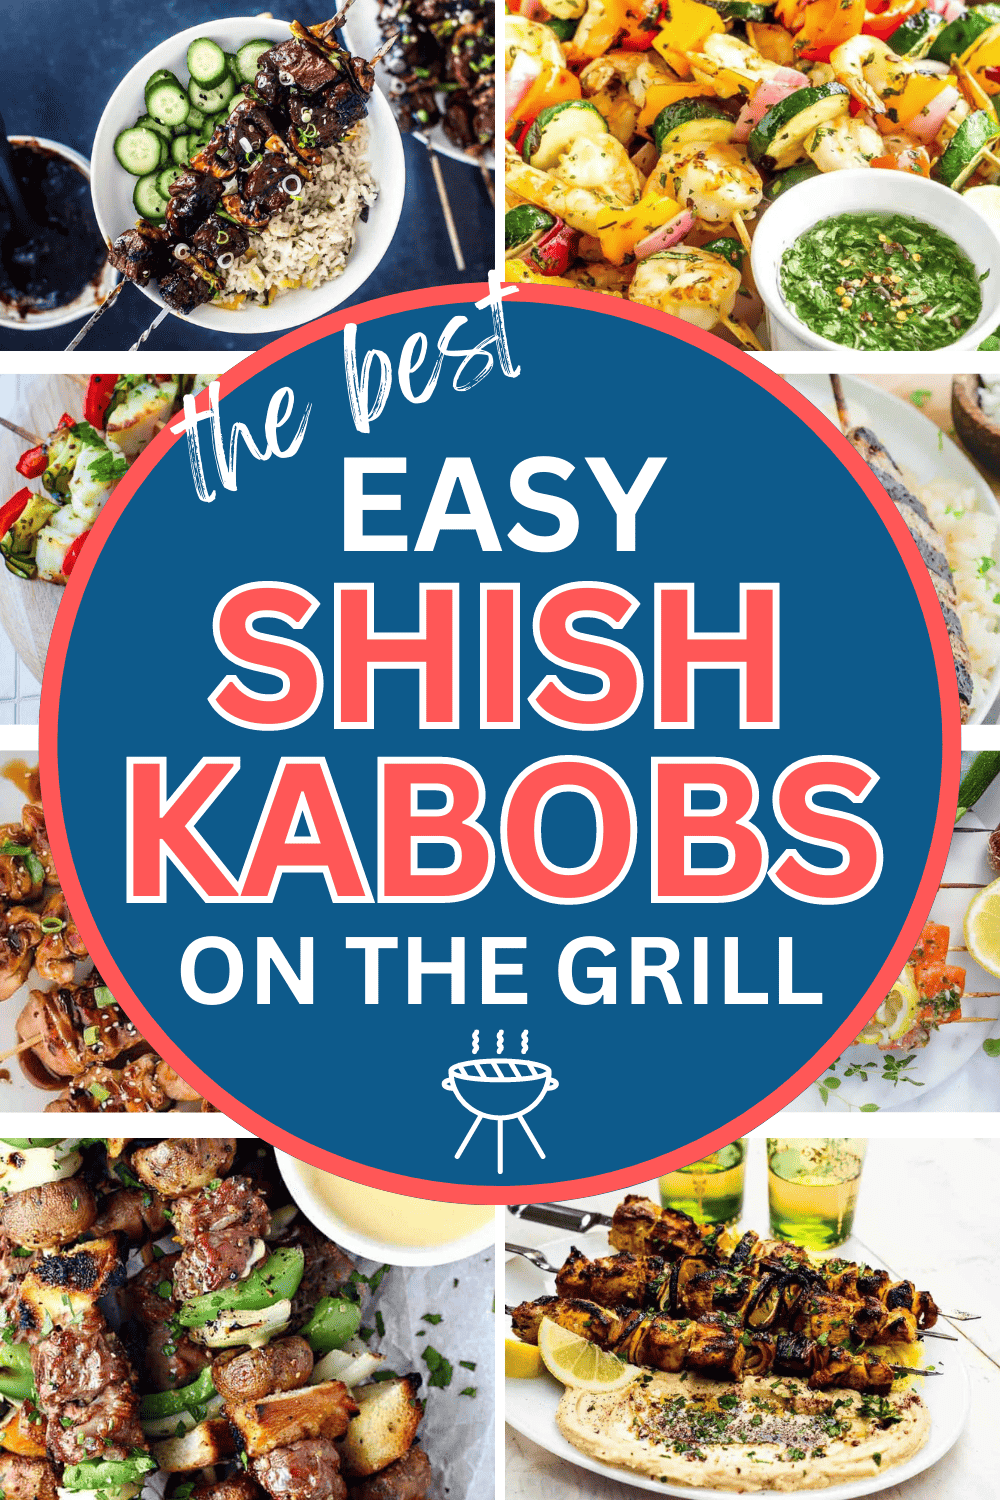 The best shish kabobs on the grill! These easy grilling kabob recipes have unique global flavors and make quick and easy summer dinners. Easy shish kabobs on the grill, bbq kebabs skewer recipes, best grilled shish kabob recipes, shish kabobs on the grill recipe, bbq skewers recipes chicken, beef skewers grill kabob recipes, grilled skewers ideas kabobs, how to make shish kebabs on the grill, chicken shish kebabs on the grill marinade, bbq kabobs on the grill veggie shrimp sides, kabob recipes.